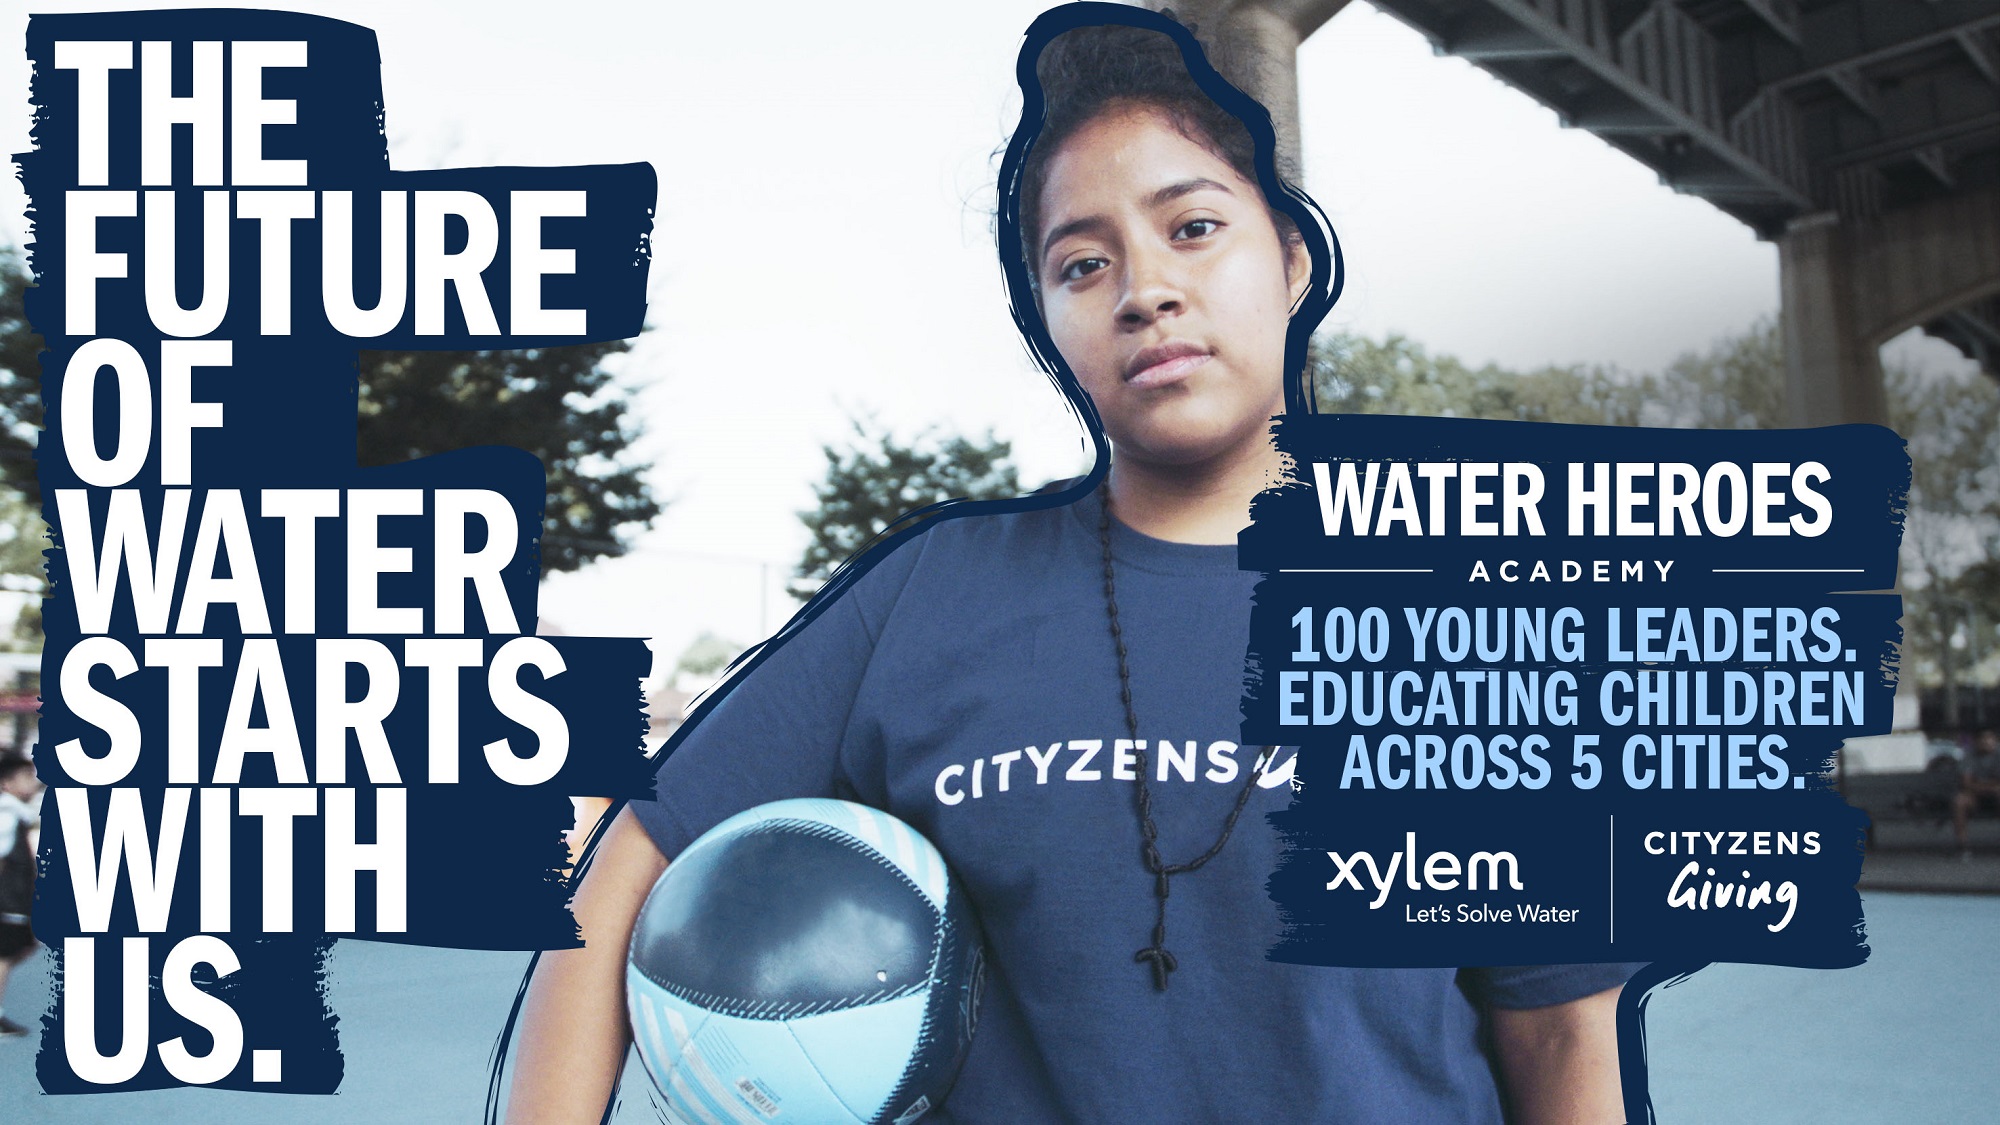 Xylem announced the launch of the project with Cityzens Giving on World Water Day.